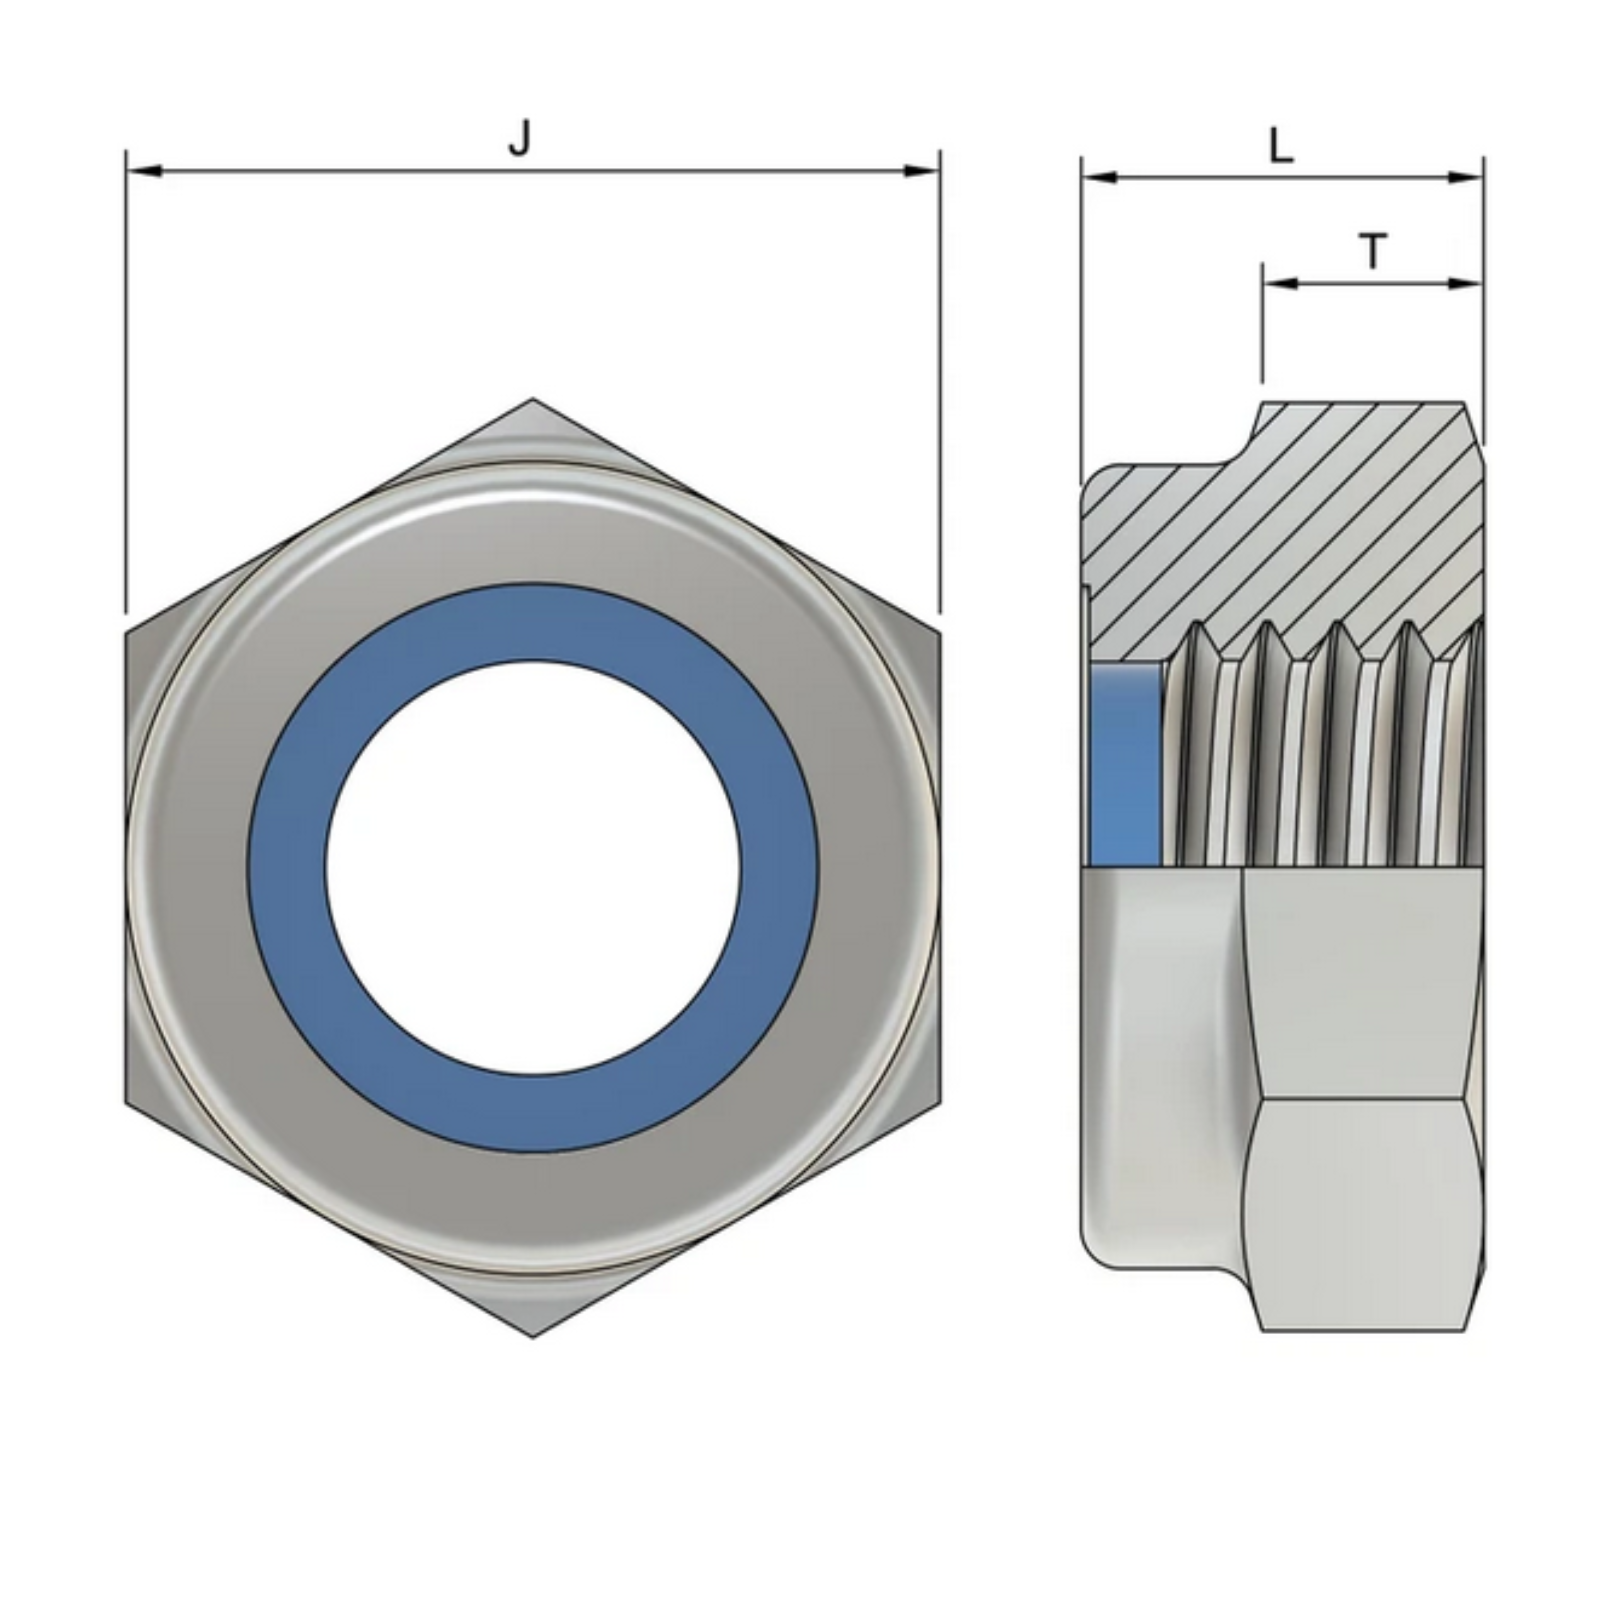 M12 Hexagon Nylon Locking Nuts (DIN 985) - Stainless Steel (A2)